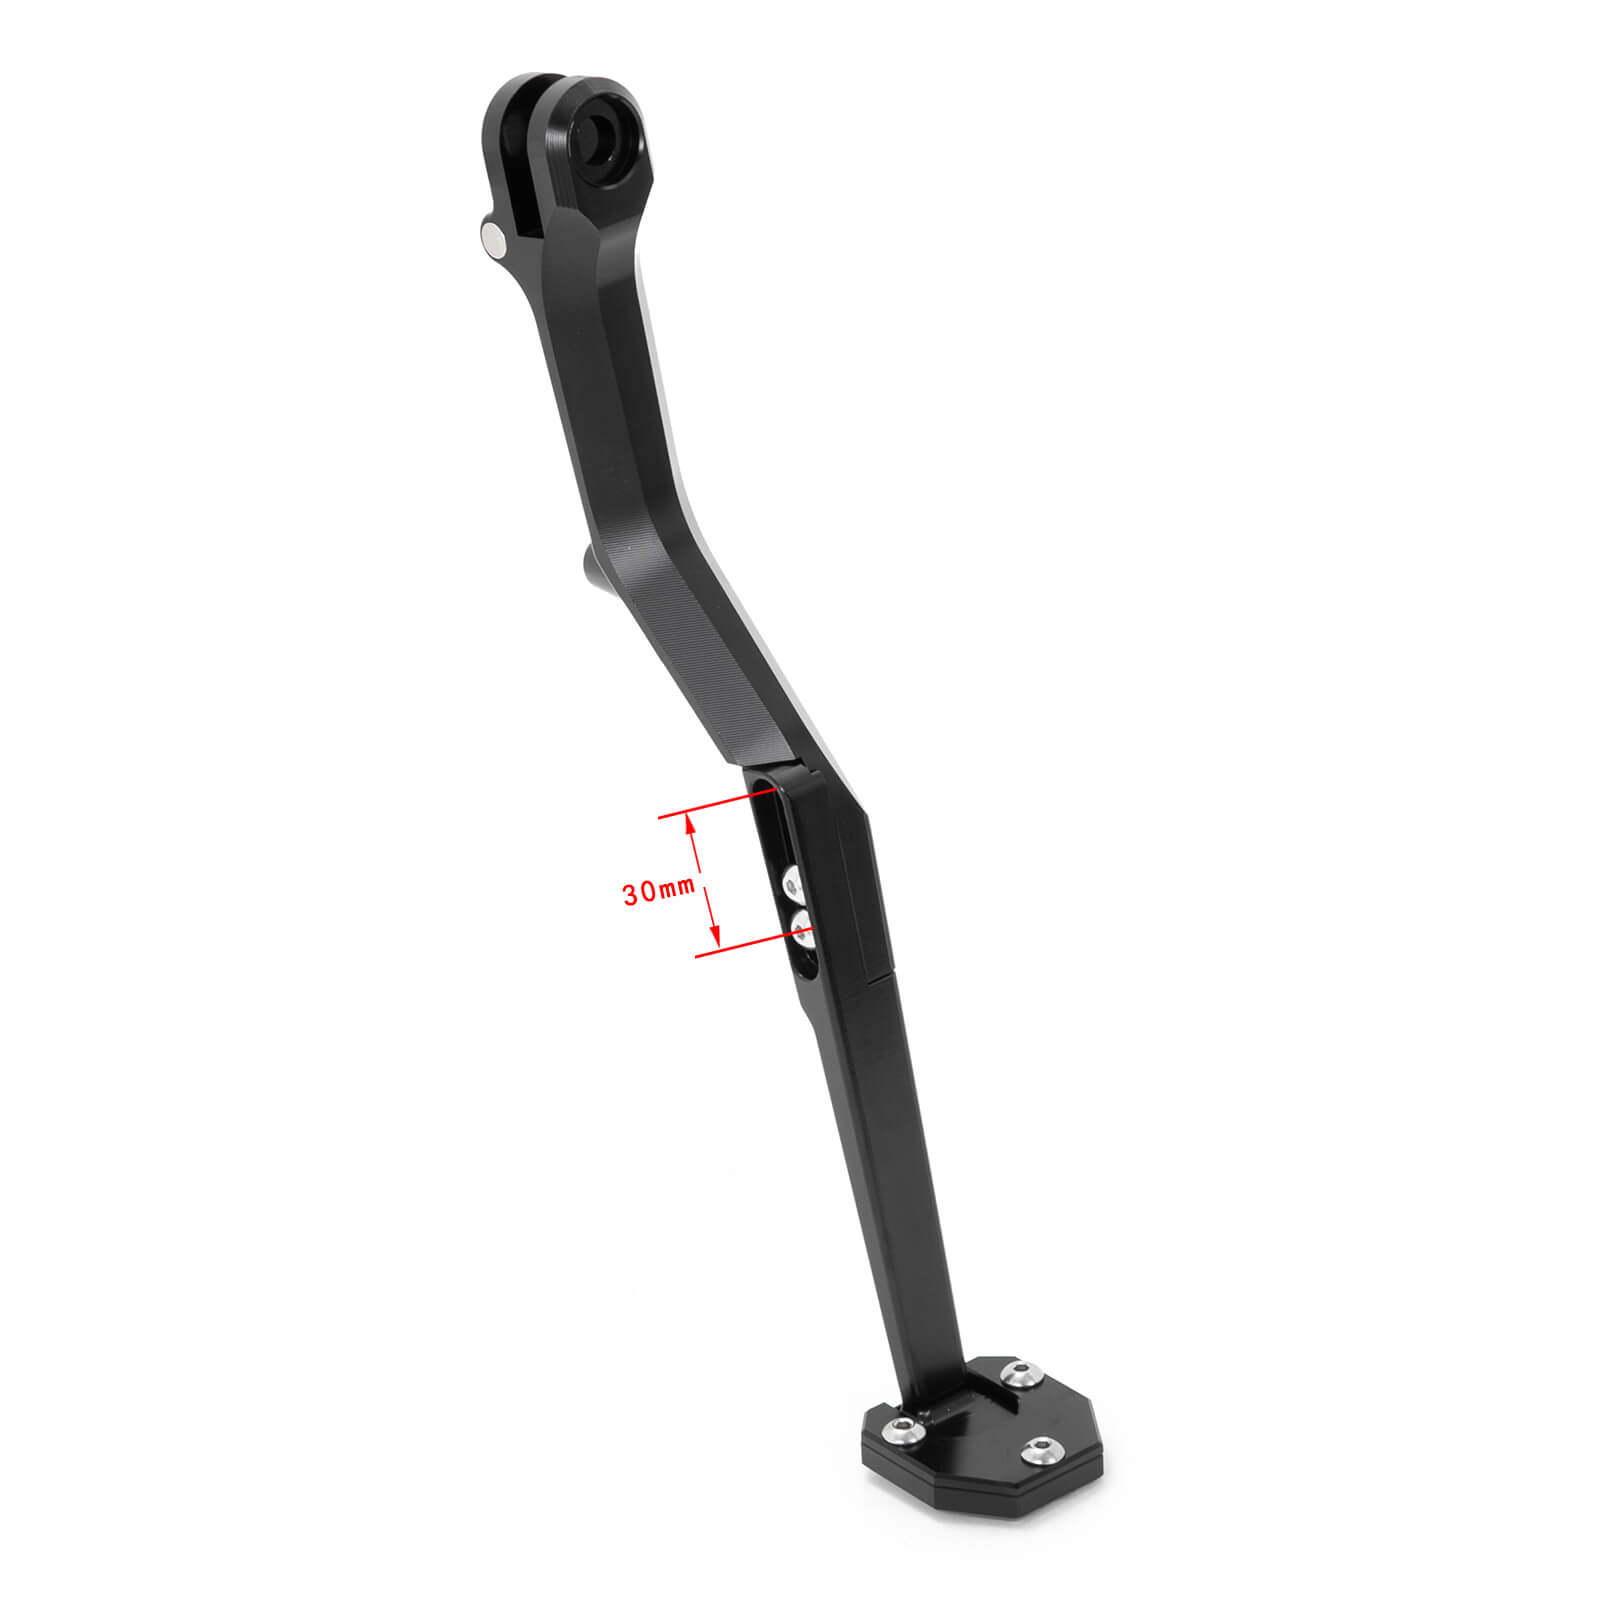 Electric Dirt Bike Adjustable Kickstand Side Stand Upgrade for Sur Ron Light Bee Segway X160 & X260 Talaria Sting